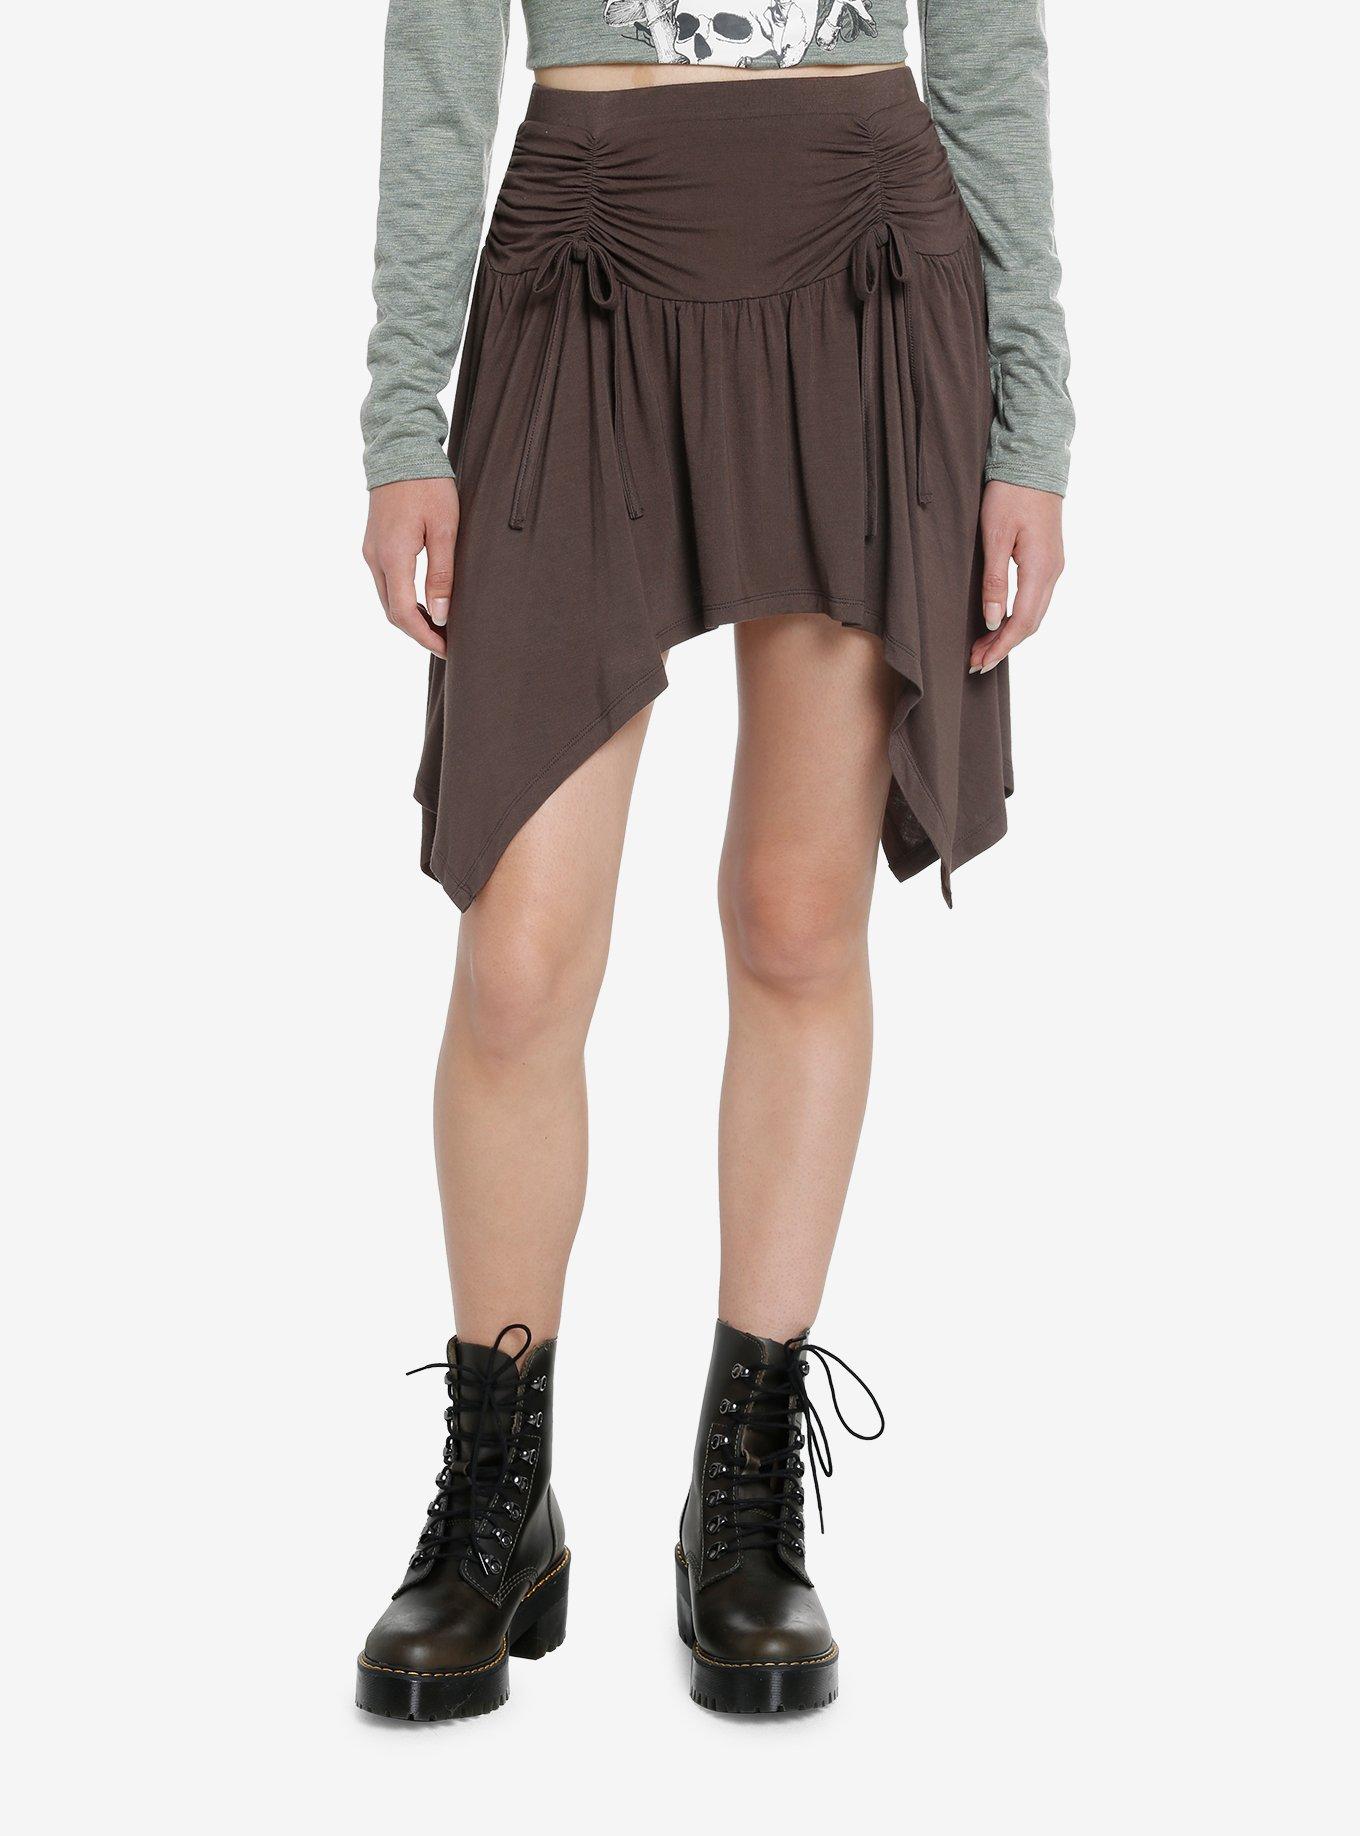 Thorn & Fable Grey Ruched Front Mini Skirt, GREY, hi-res